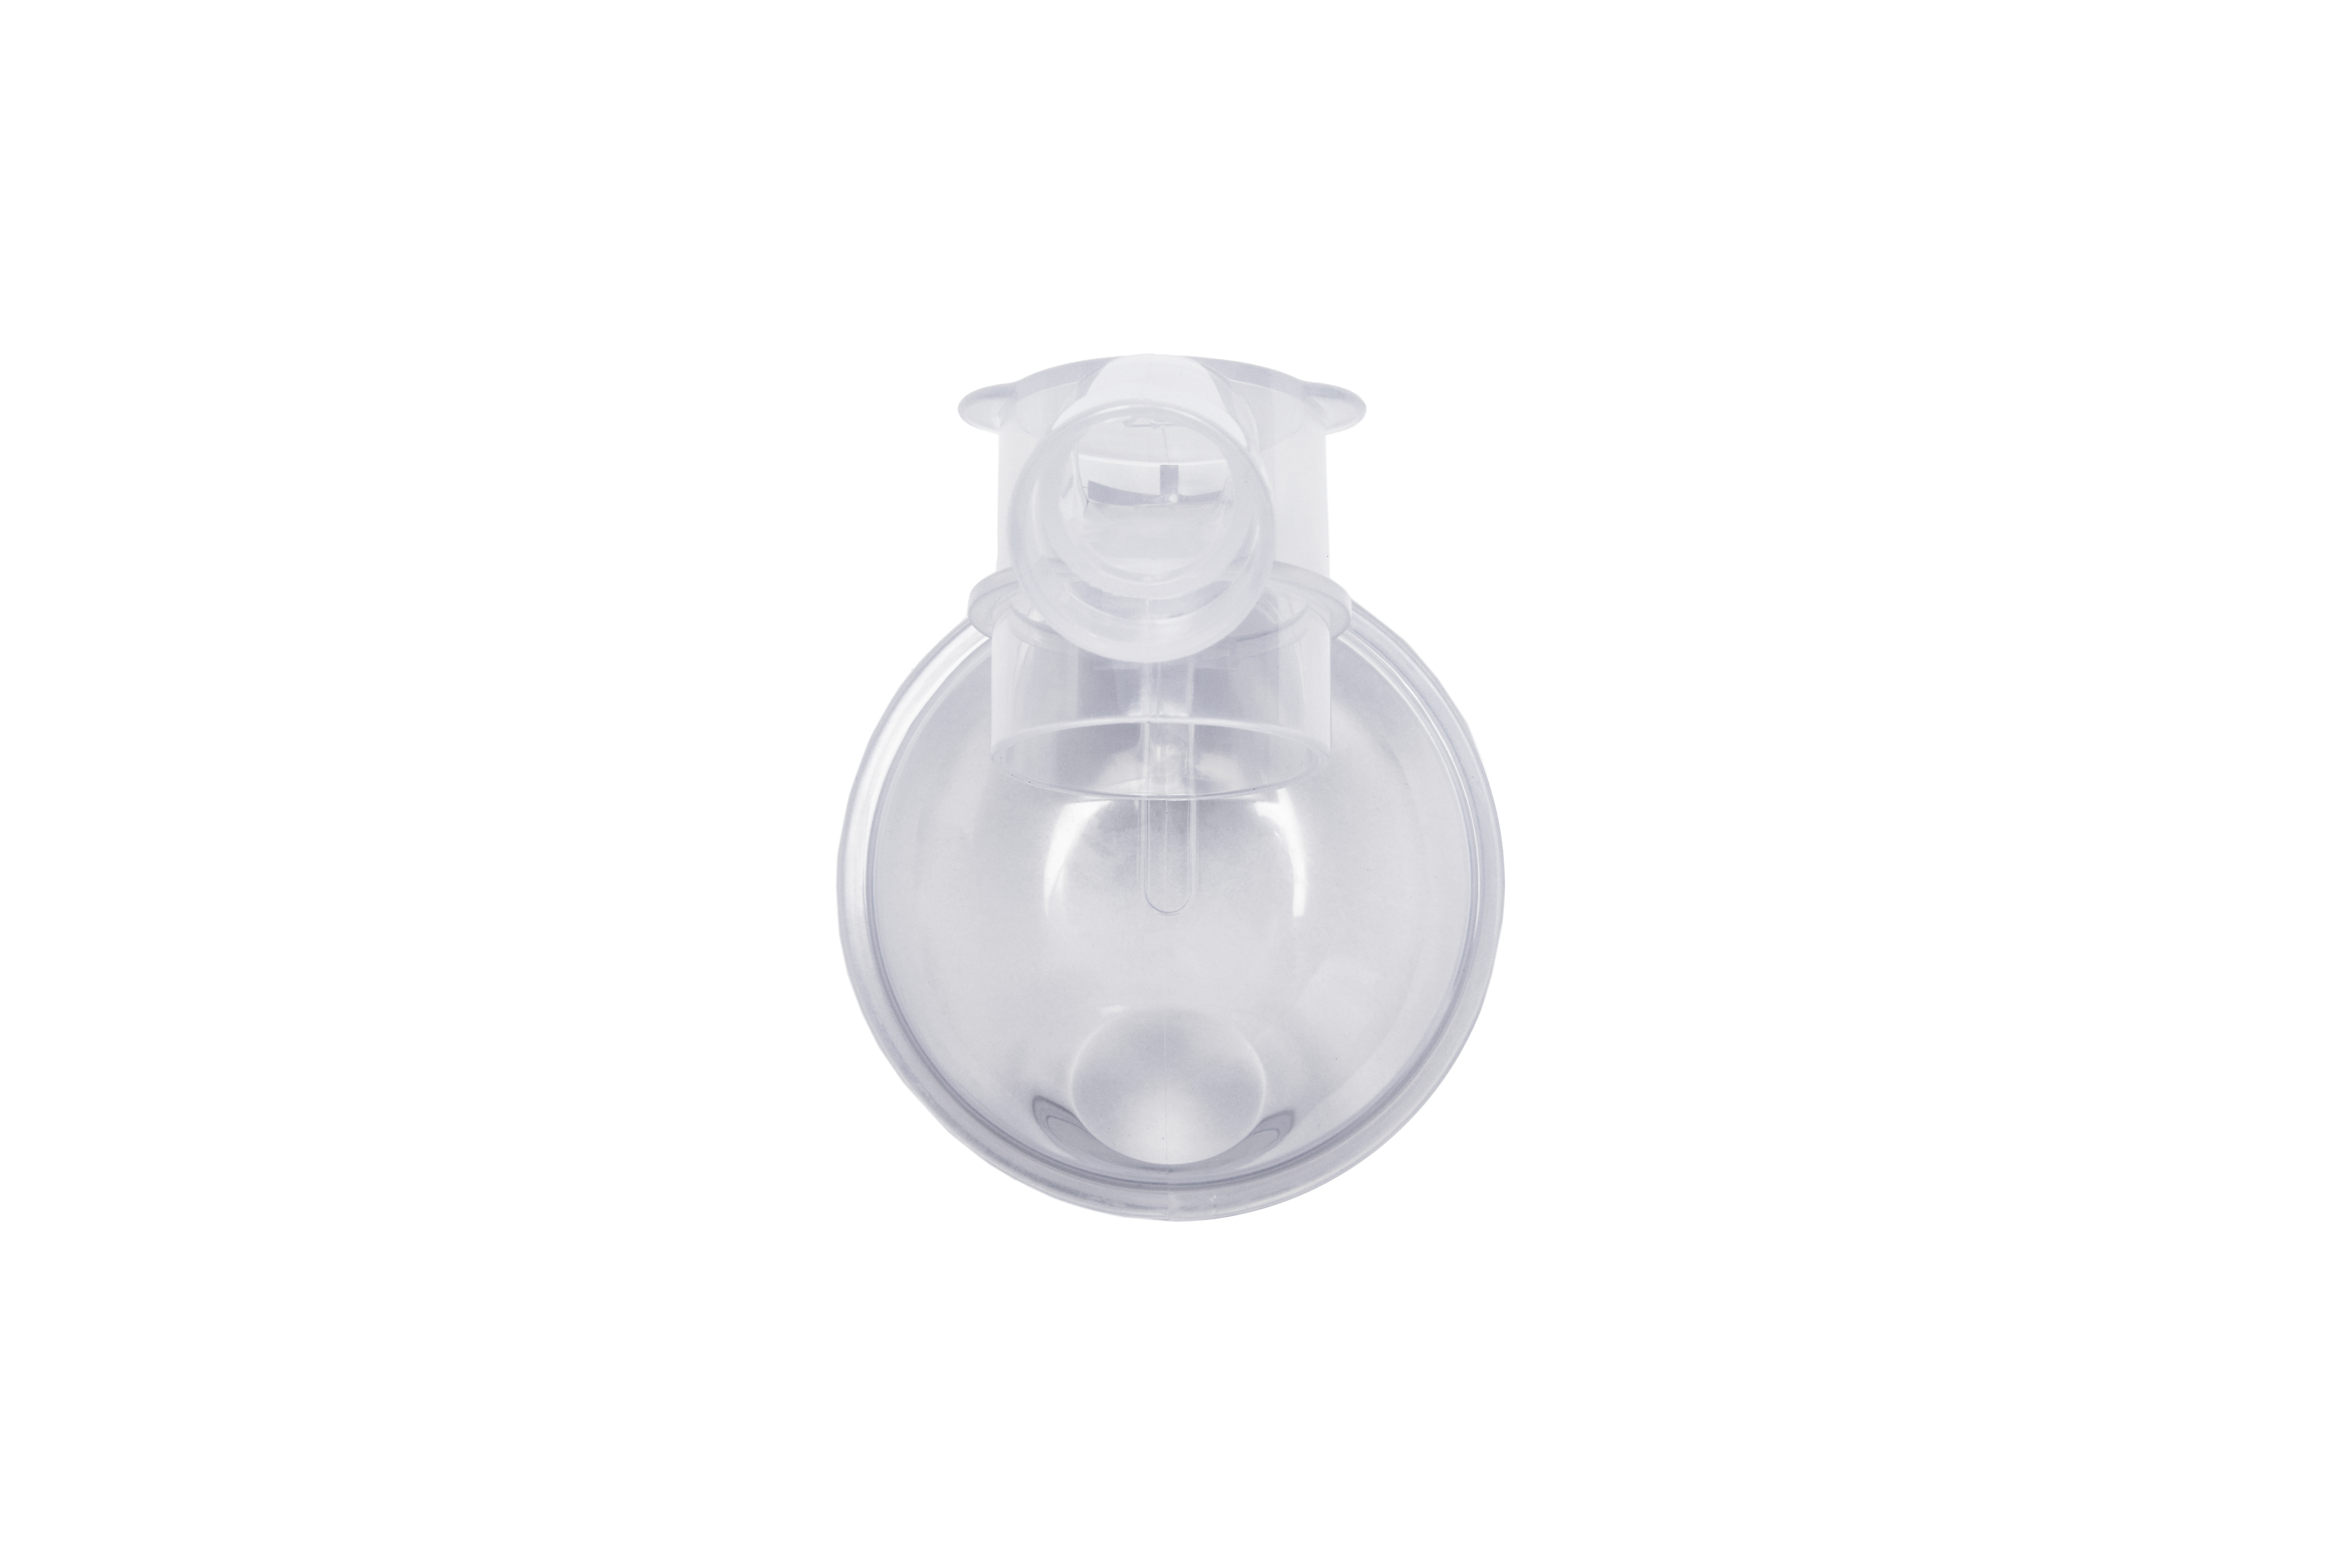 Corps de protection mammaire en silicone HFC - Zomee Breast Pumps